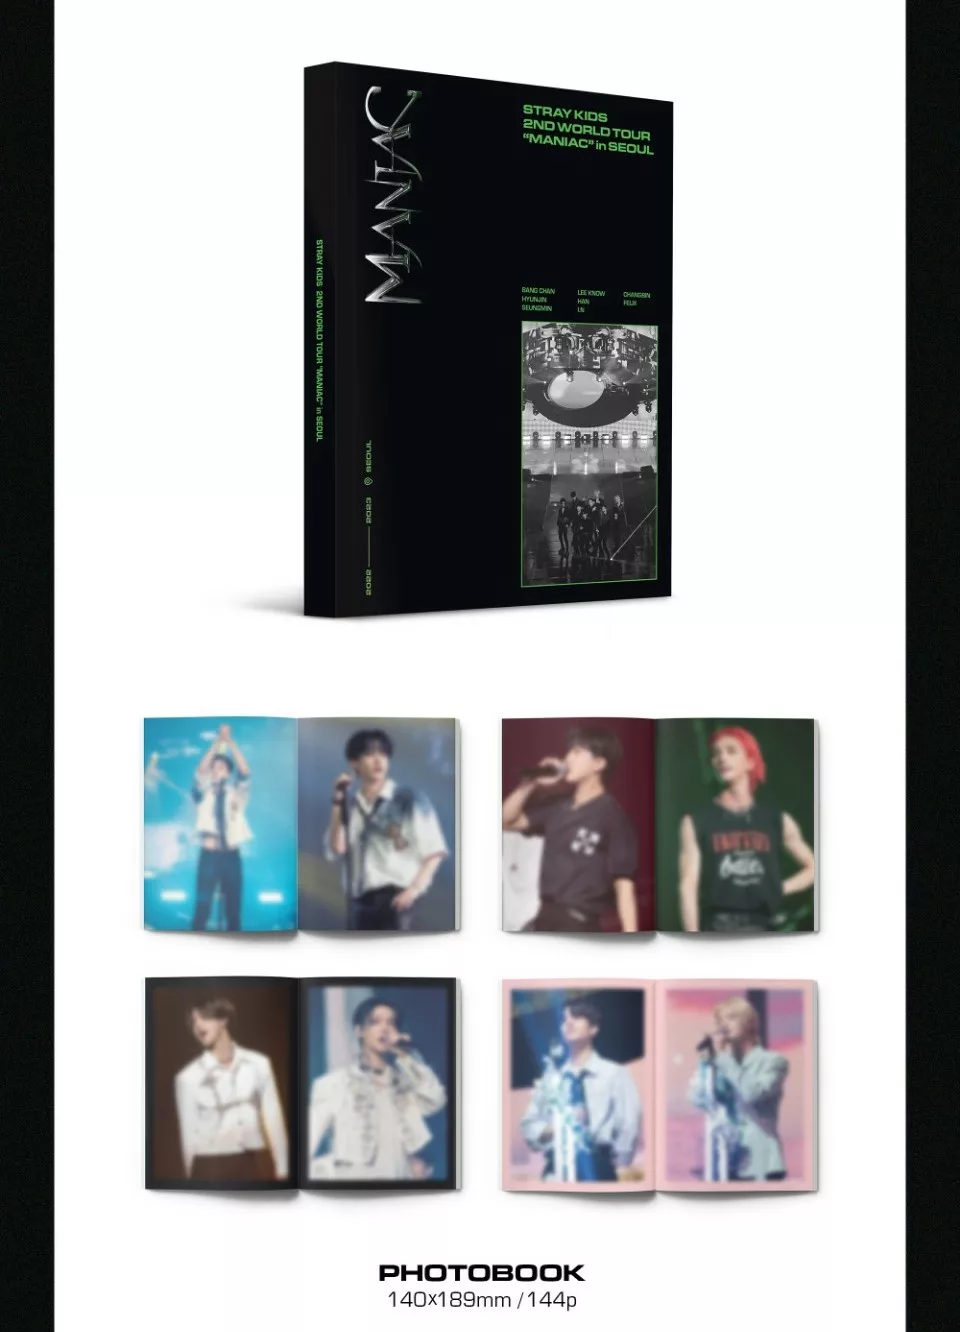 STRAY KIDS] 2ND WORLD TOUR “MANIAC” IN SEOUL DVD – Little Star Gifts